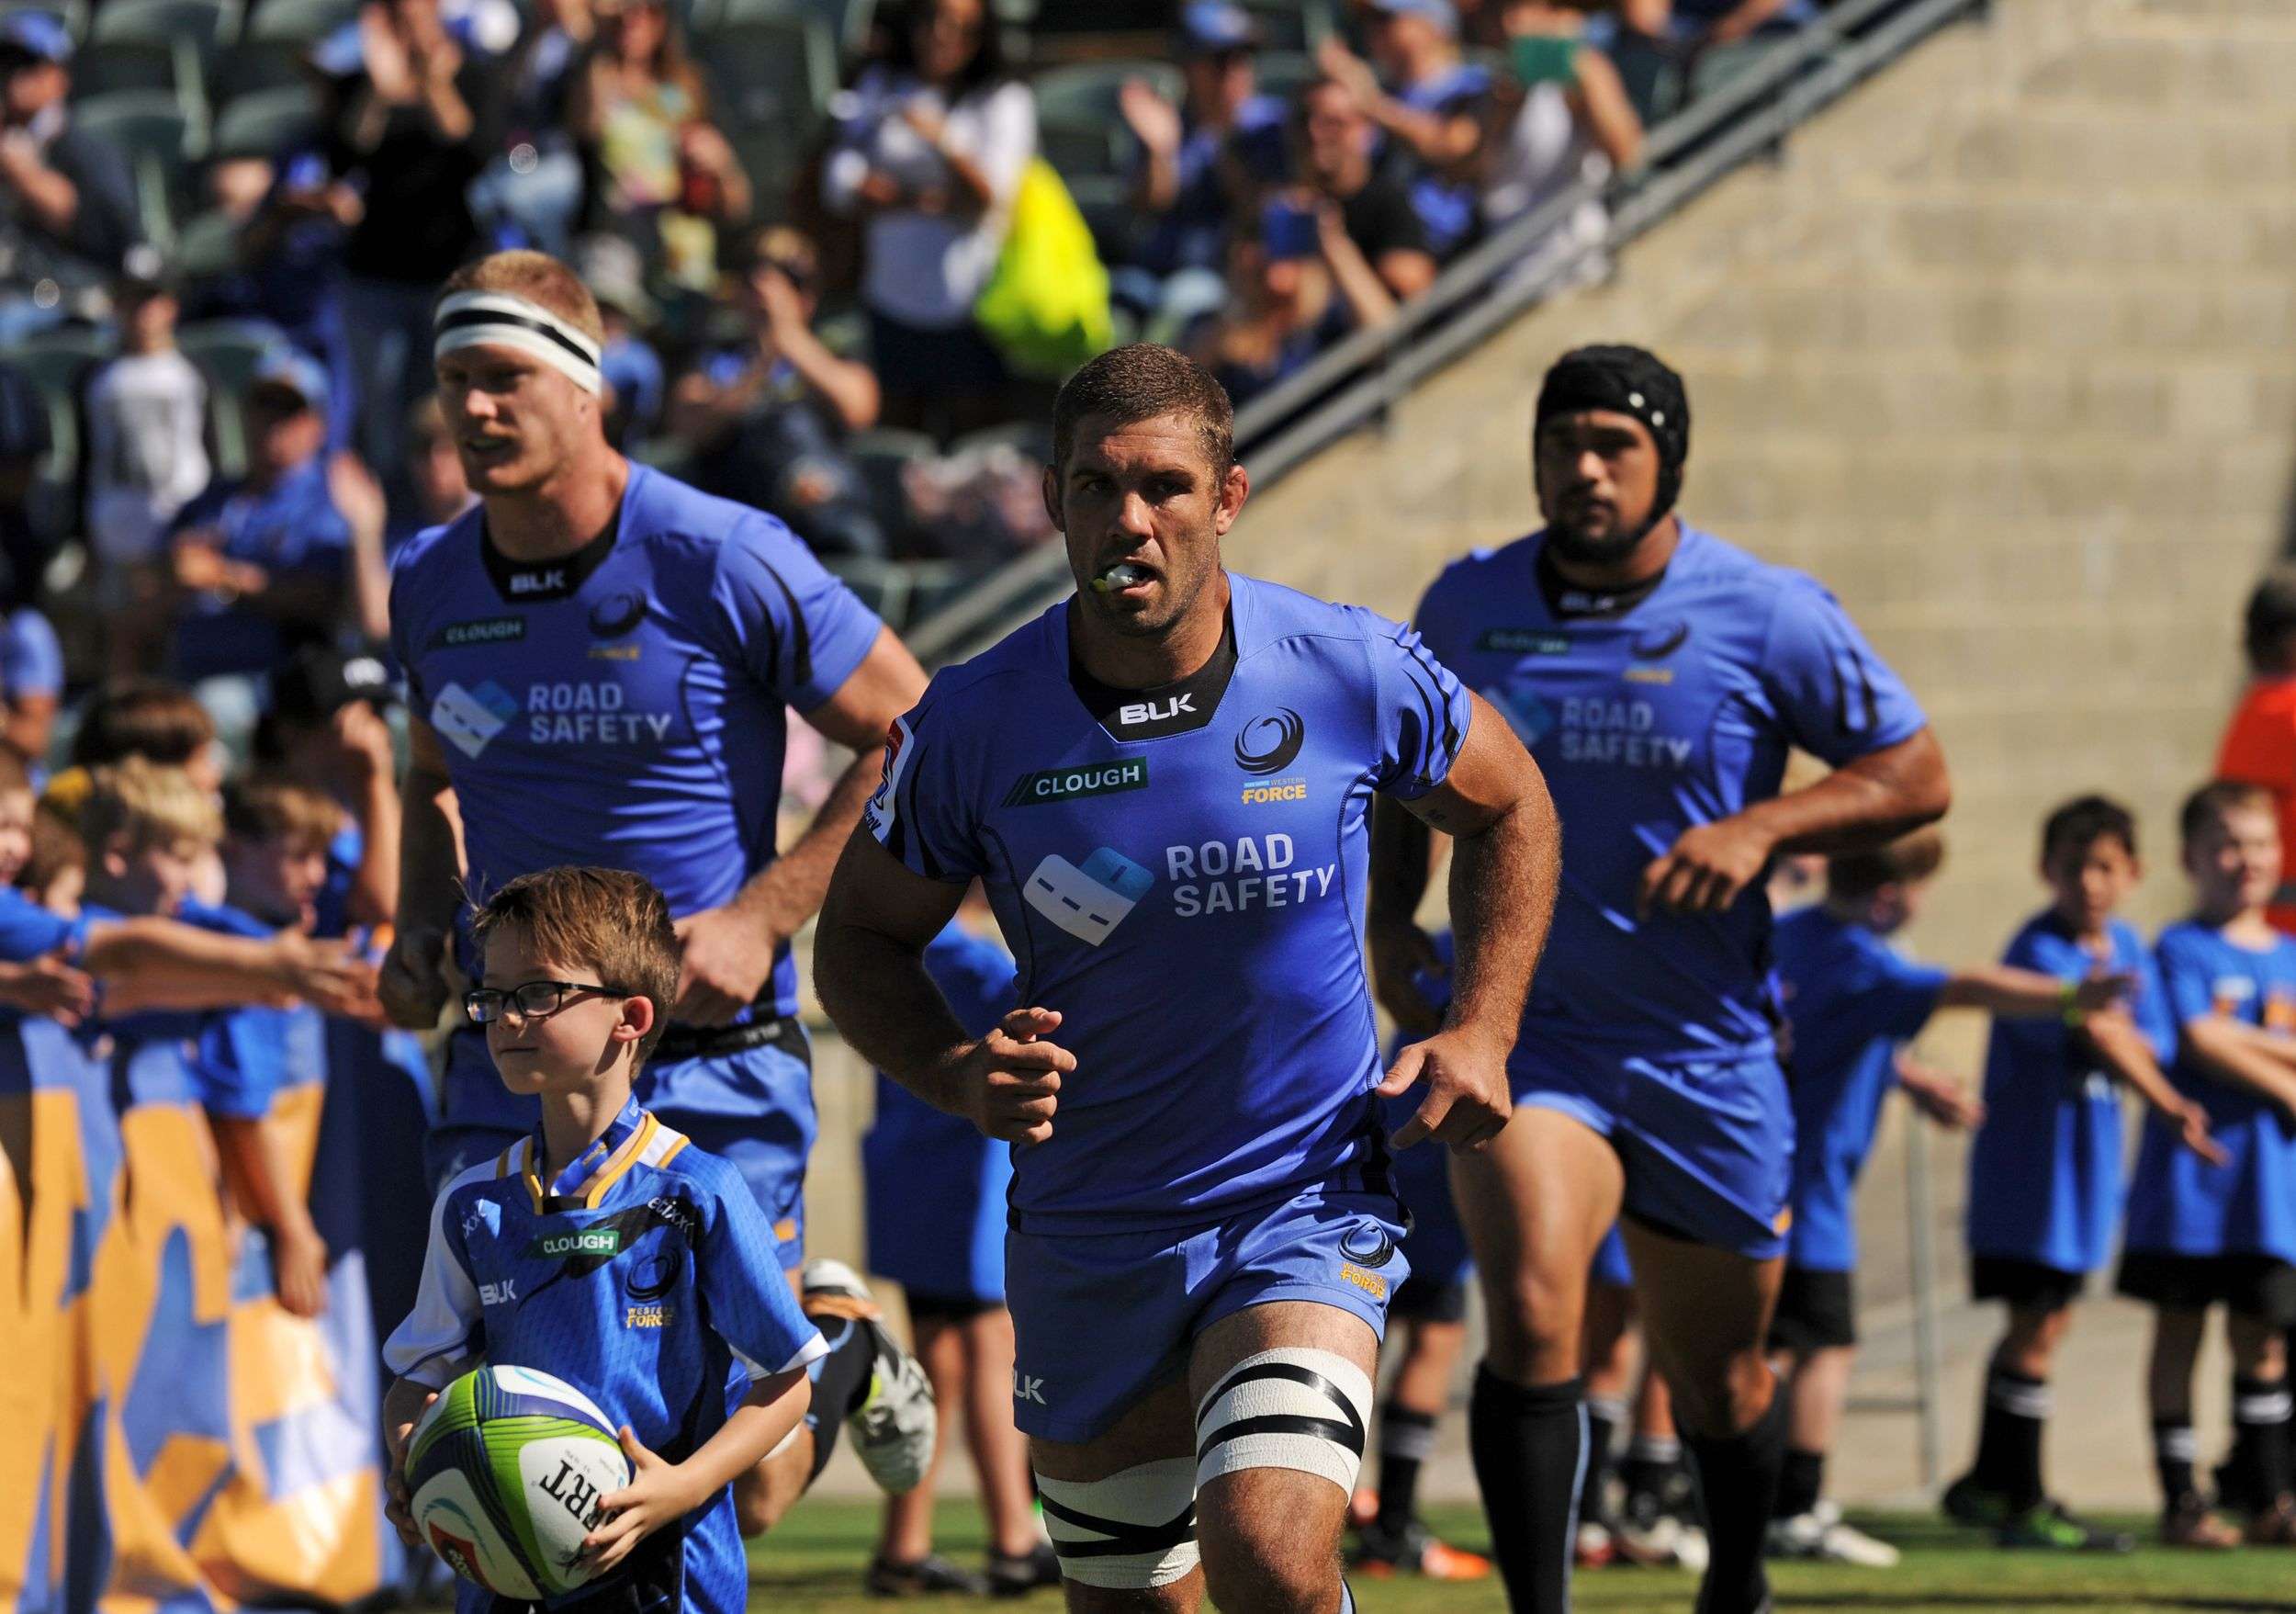 Western Force captain Matt Hodgson (centre) leads his team out against South Africa’s Southern Kings in Perth. Photo: AFP